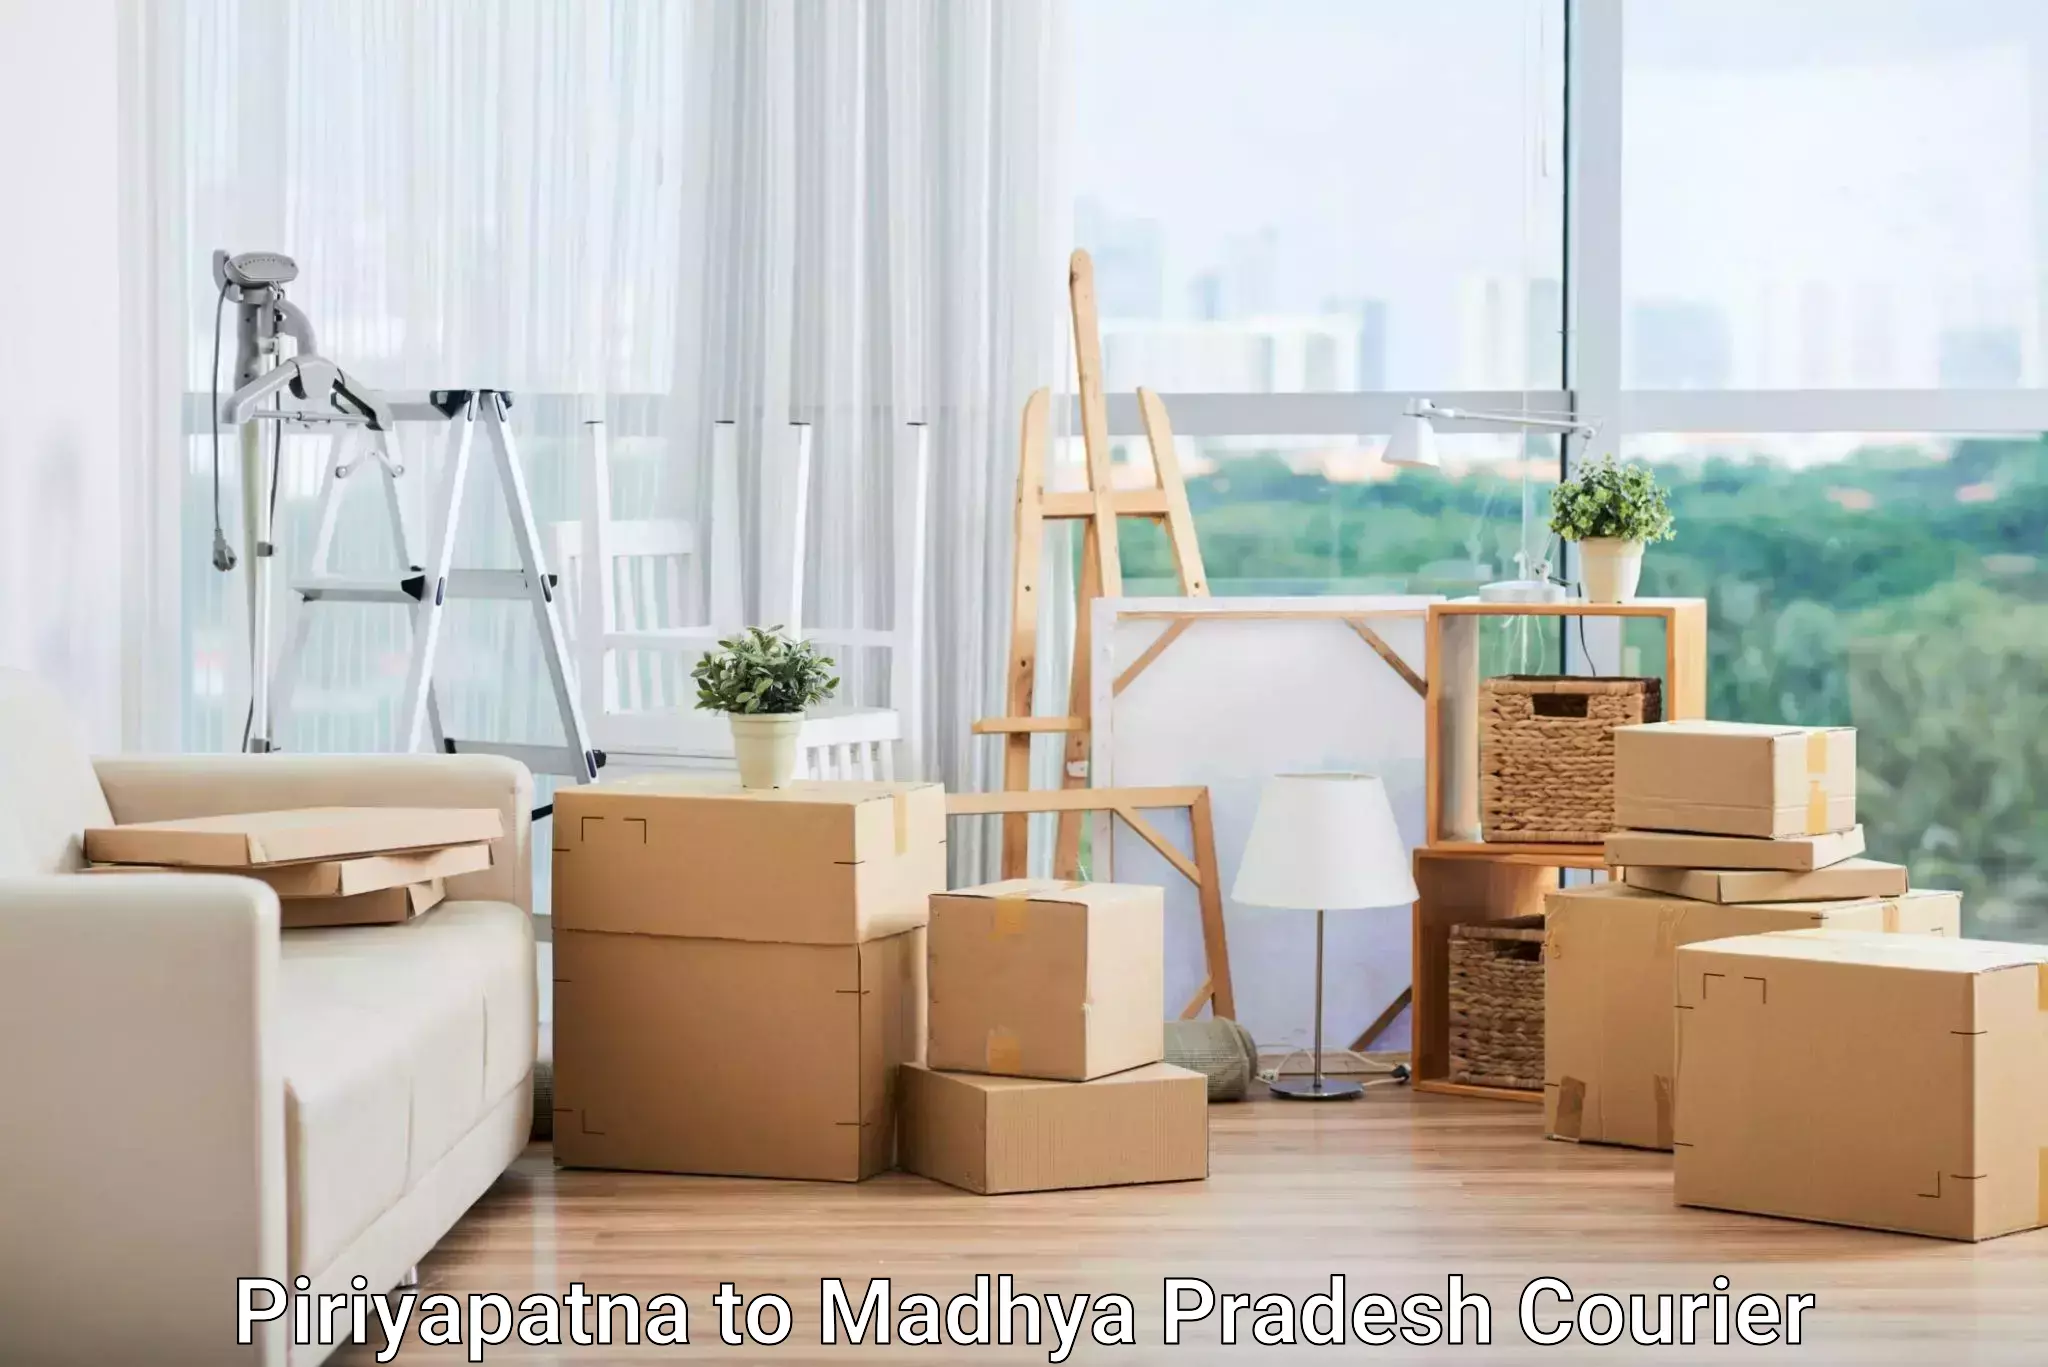 Personal parcel delivery Piriyapatna to Bhopal